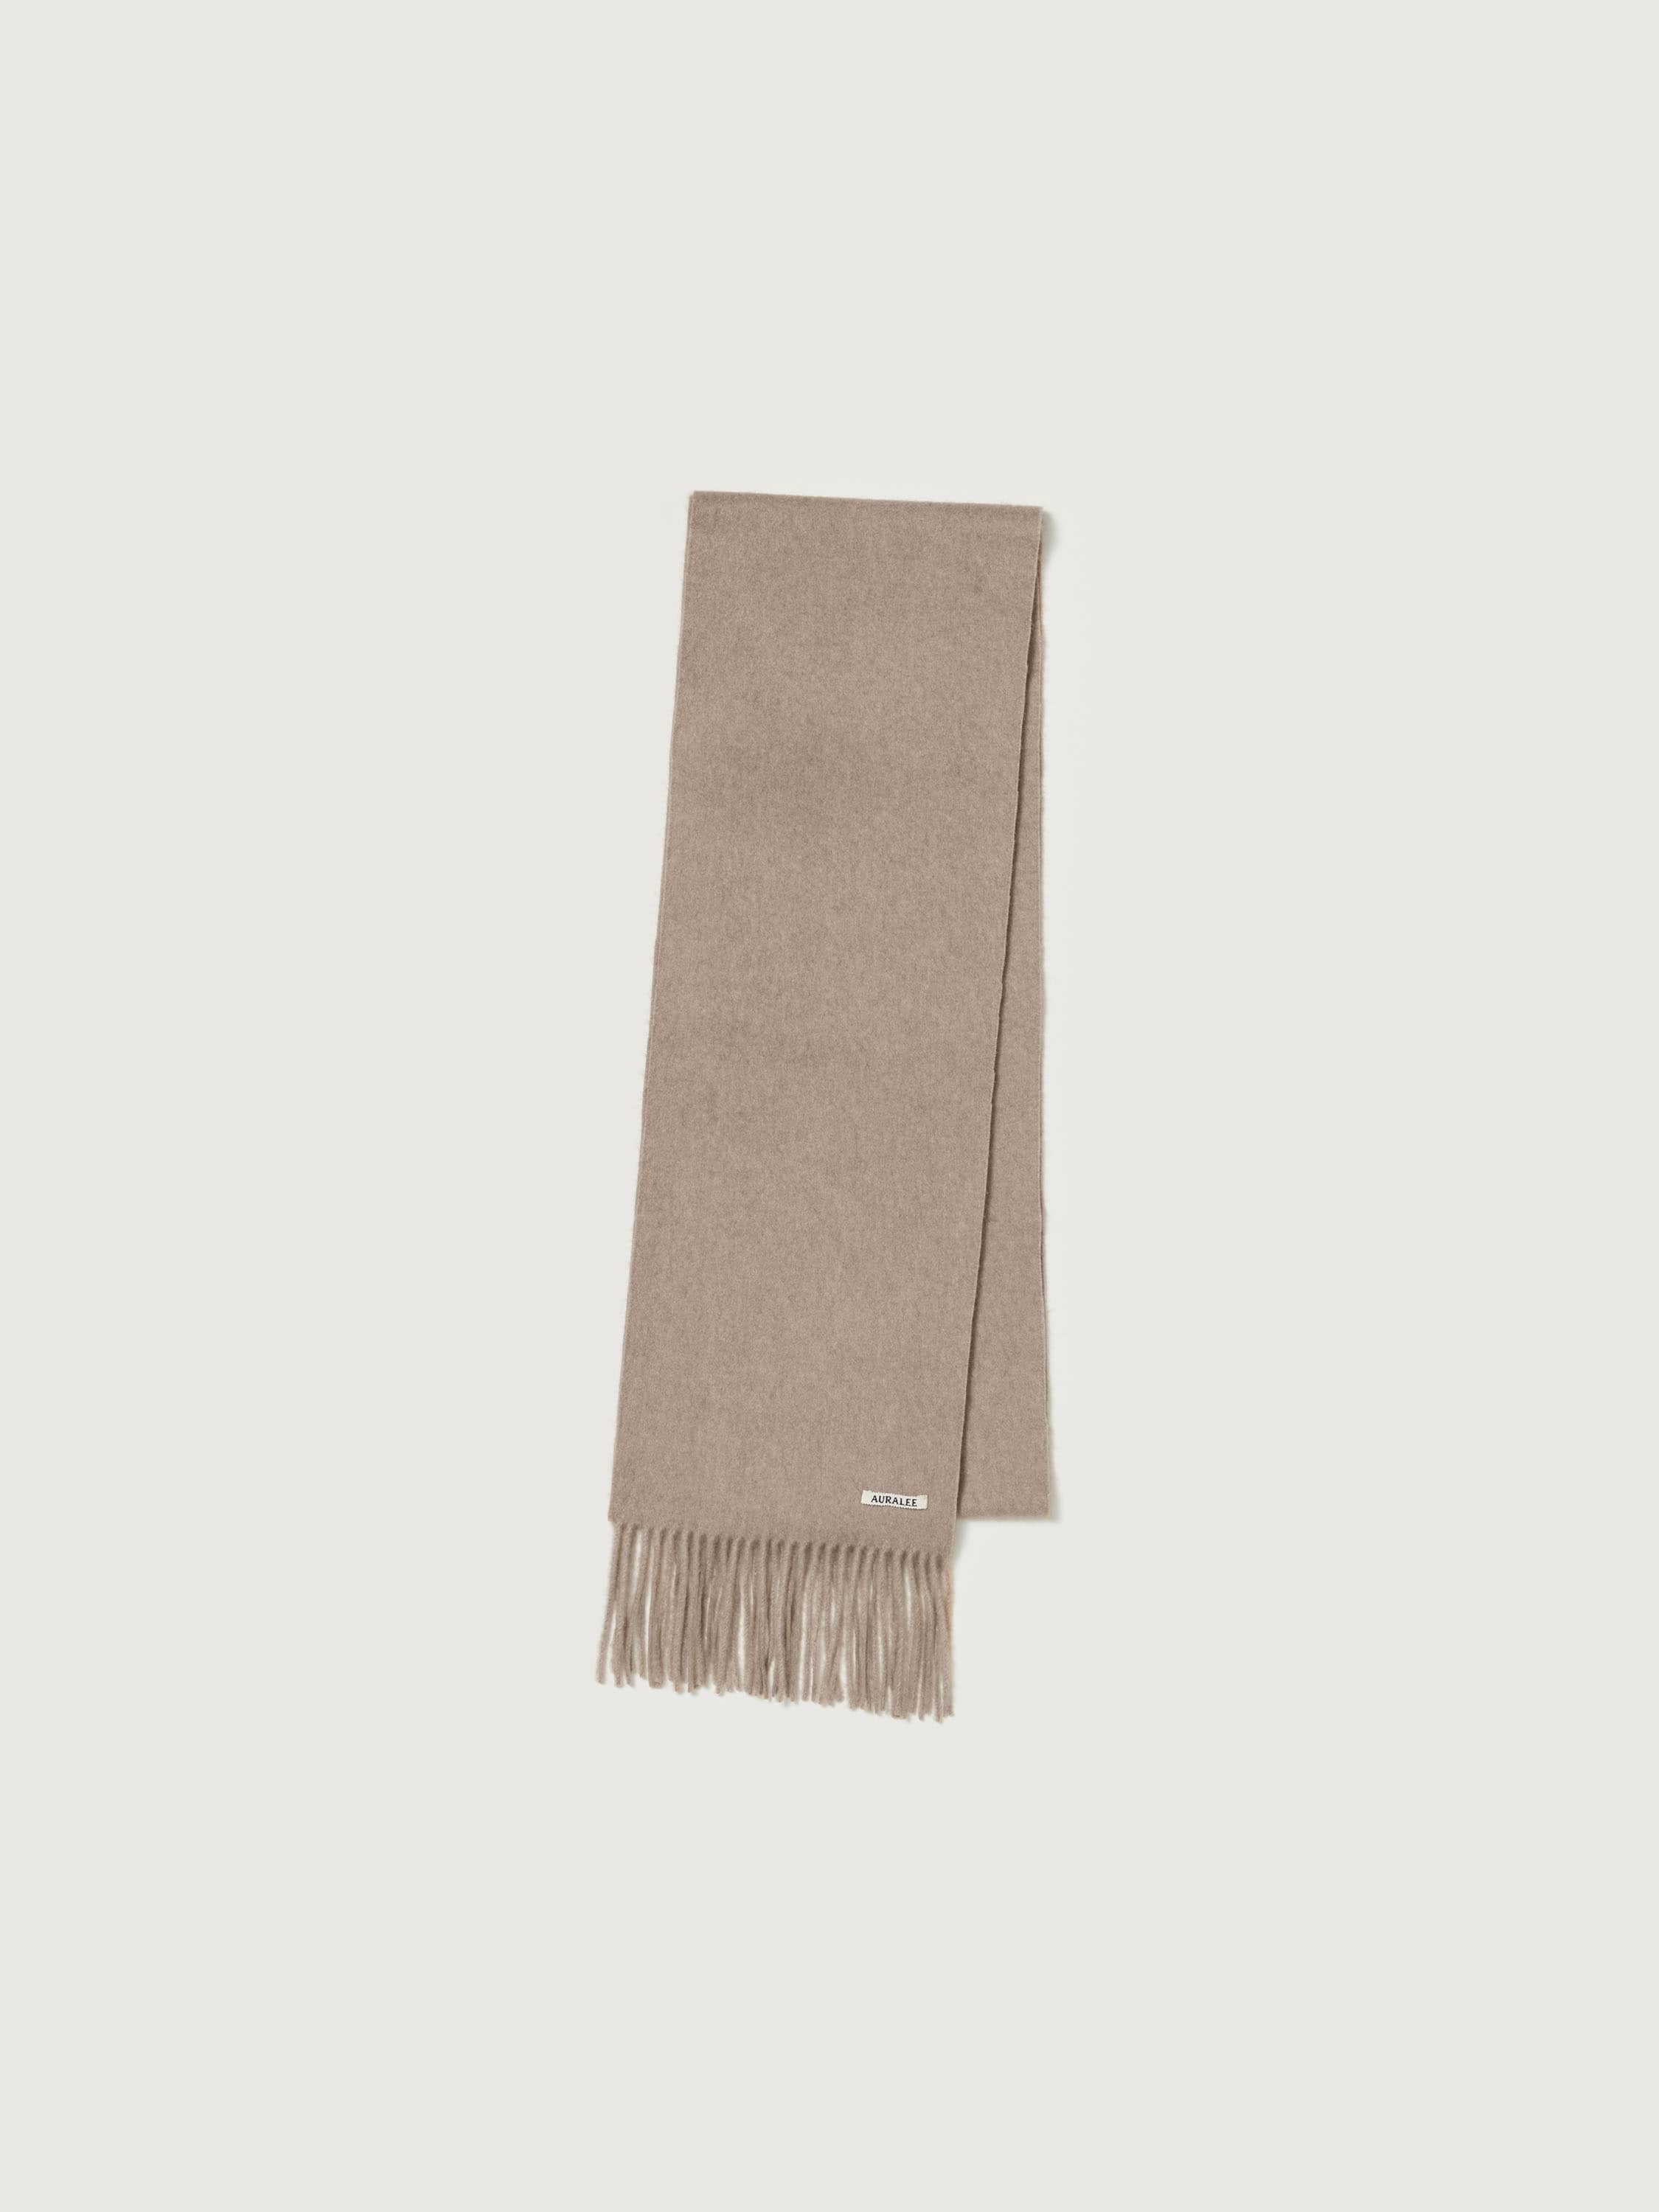 BABY CASHMERE LONG STOLE 詳細画像 NATURAL BROWN 3